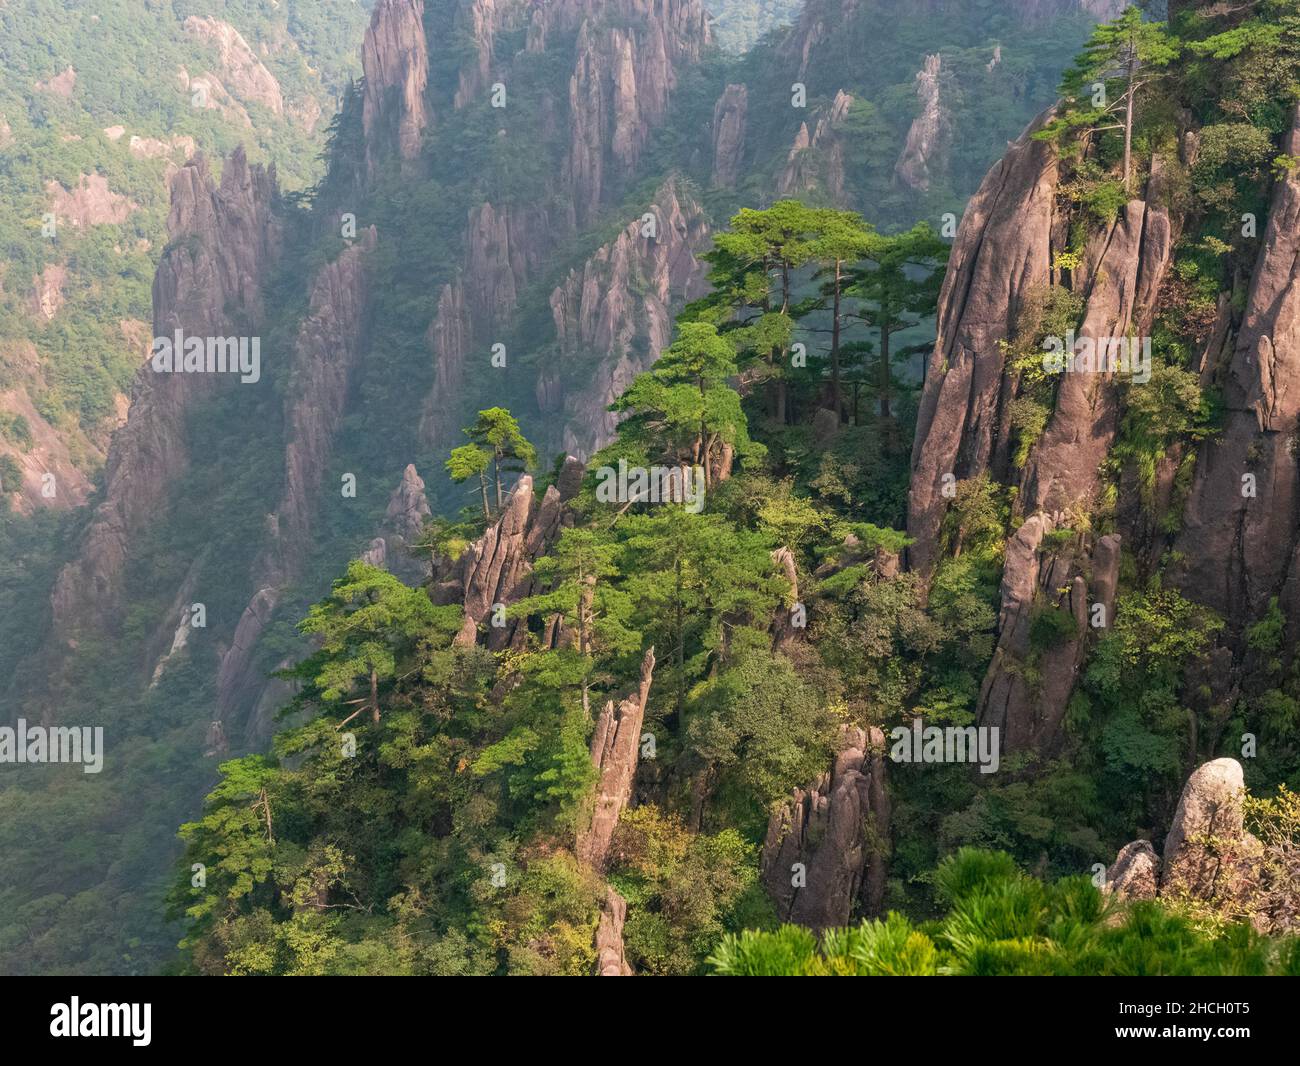 Una valle ai monti Huangshan, montagne gialle, Anhui, Huangshan, Cina, Asia, foto d'archivio Foto Stock